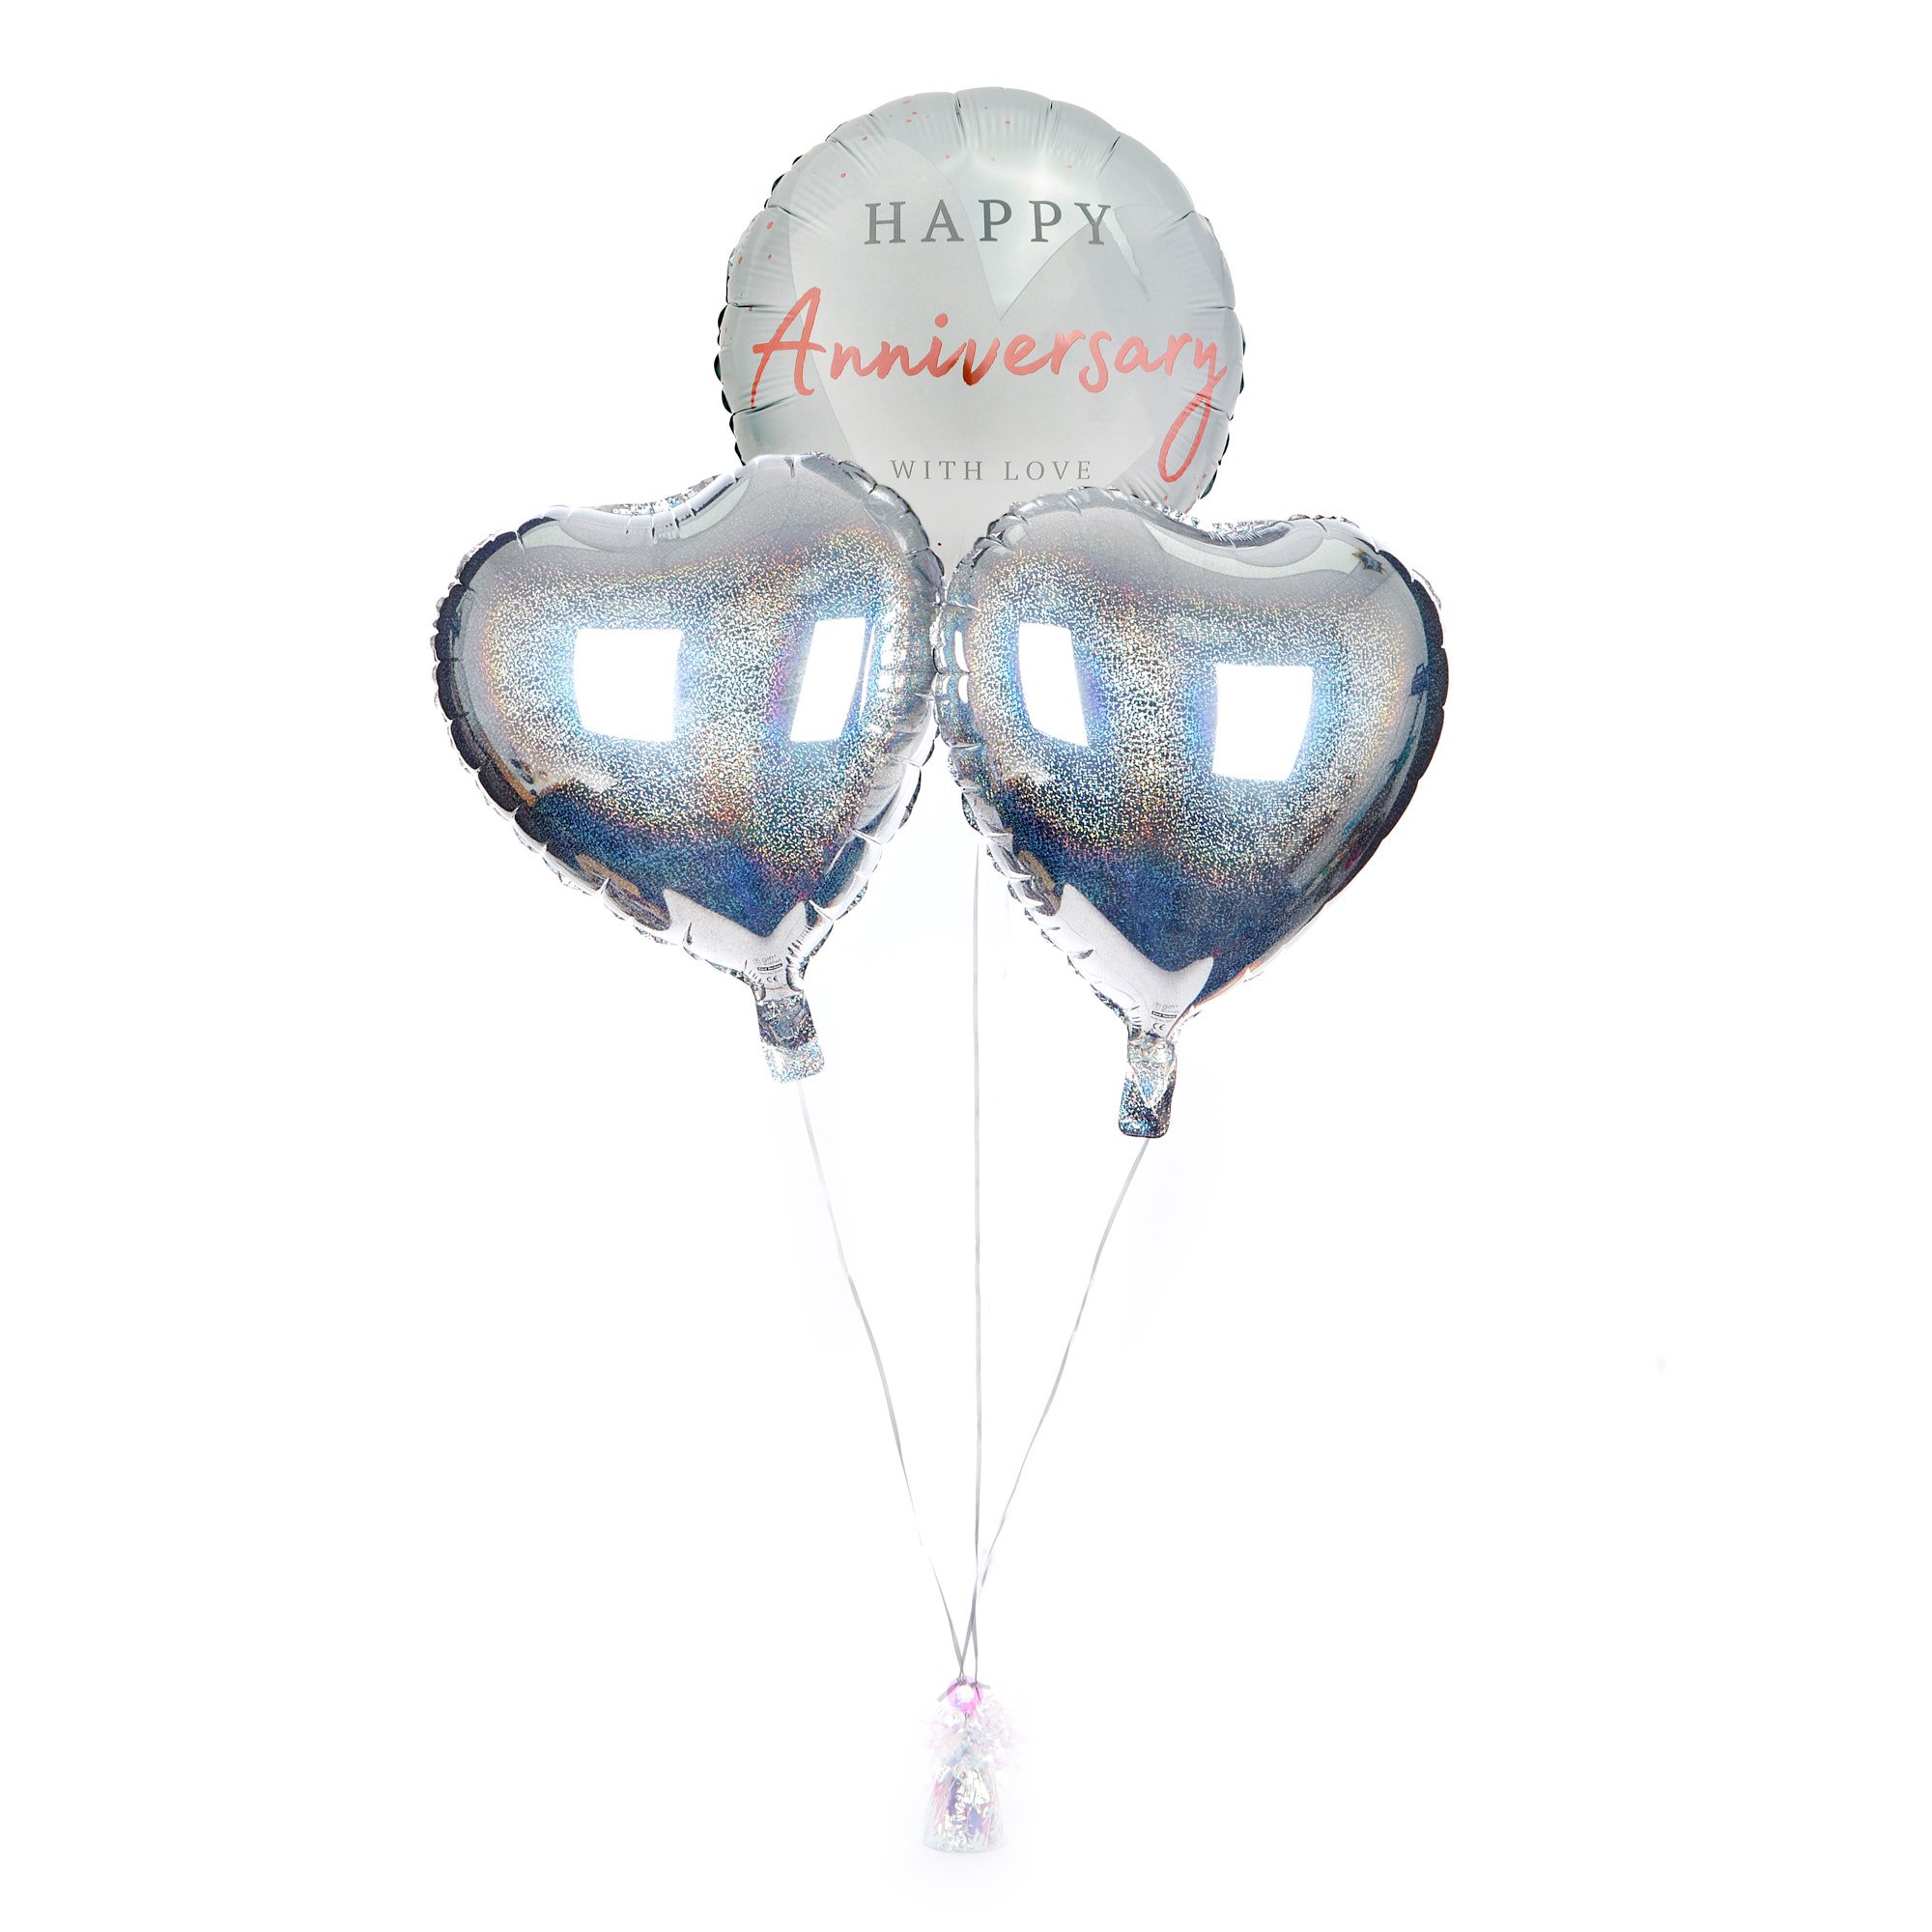 With Love Happy Anniversary Balloon Bouquet - DELIVERED INFLATED!